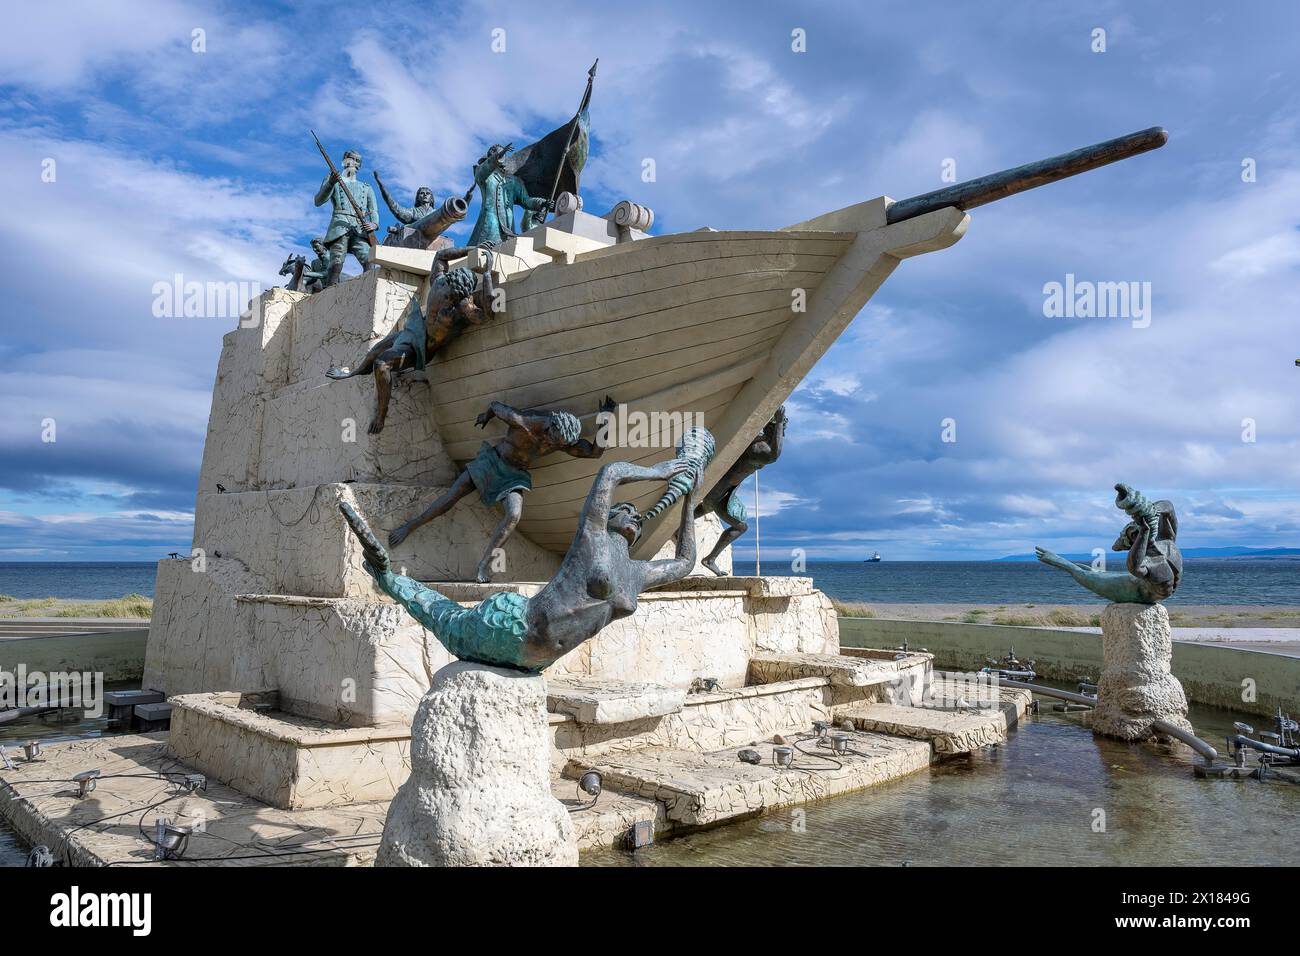 Monumento A Tripulantes Galeta Ancud, monument to the crew members of the schooner Ancud 1843 on the Strait of Magellan, Punta Arenas, city in Stock Photo